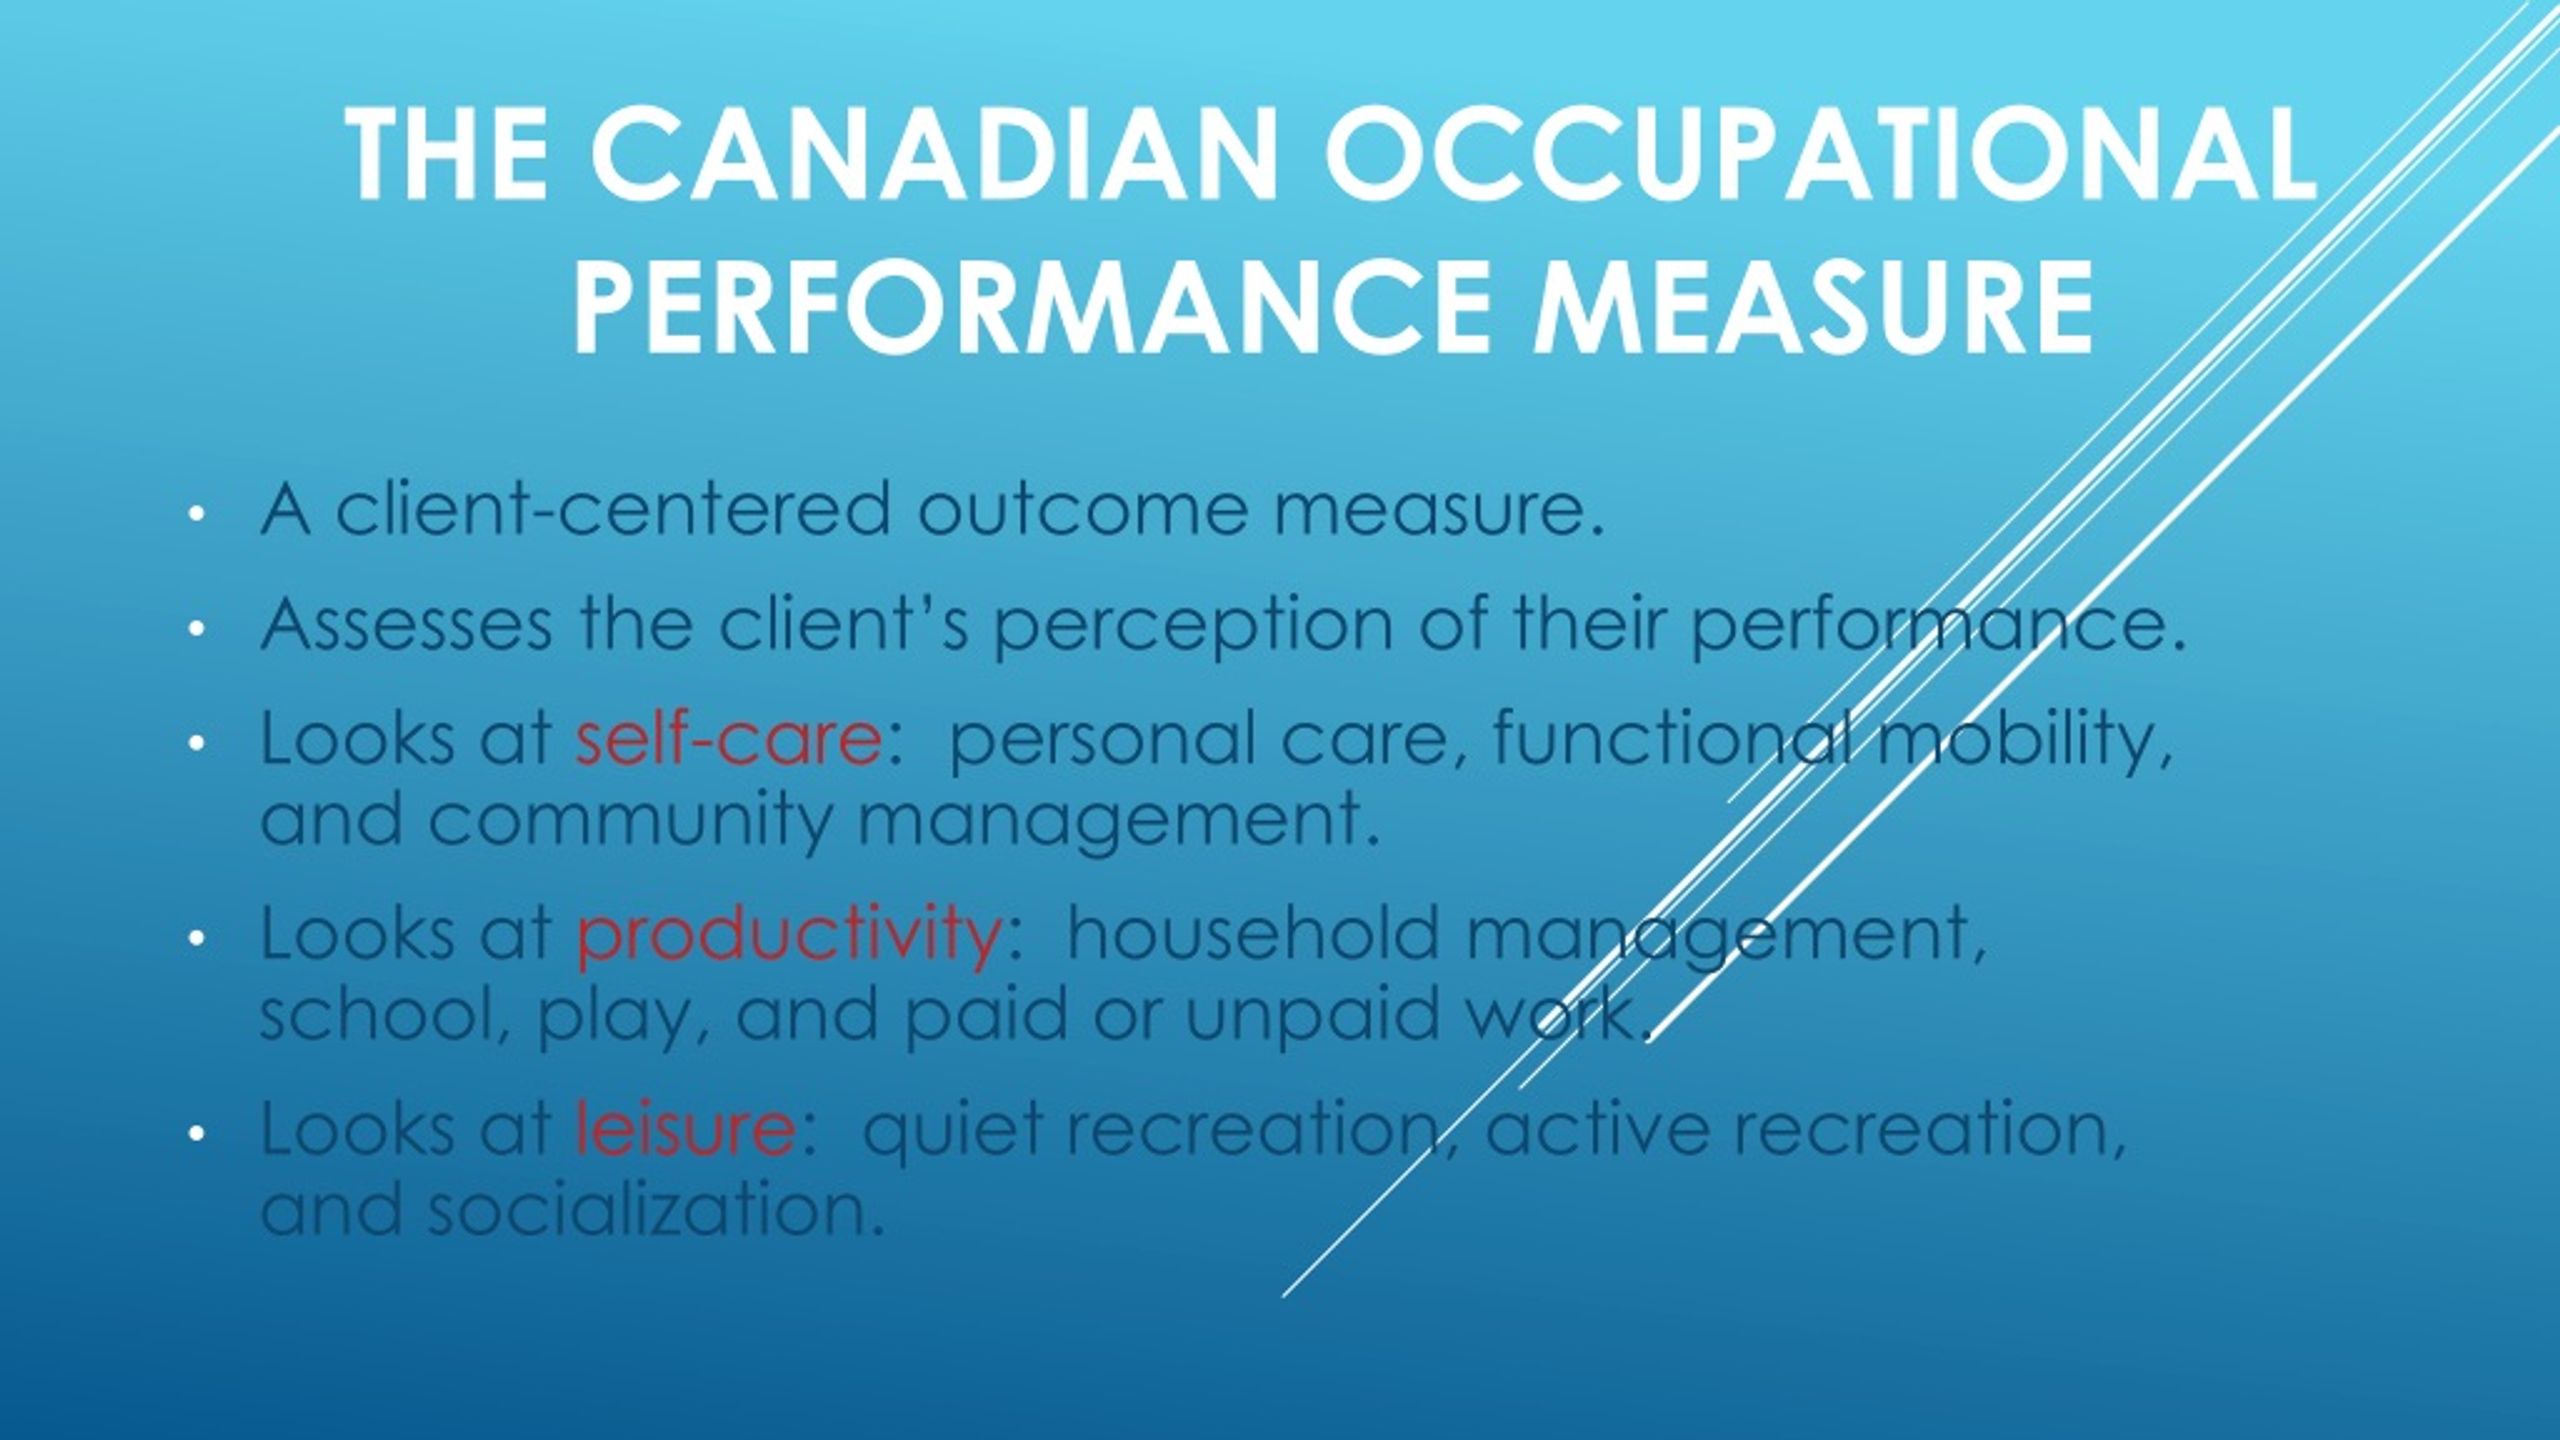 PPT - CMOP =Canadian Model of Occupational Performance CLIENT